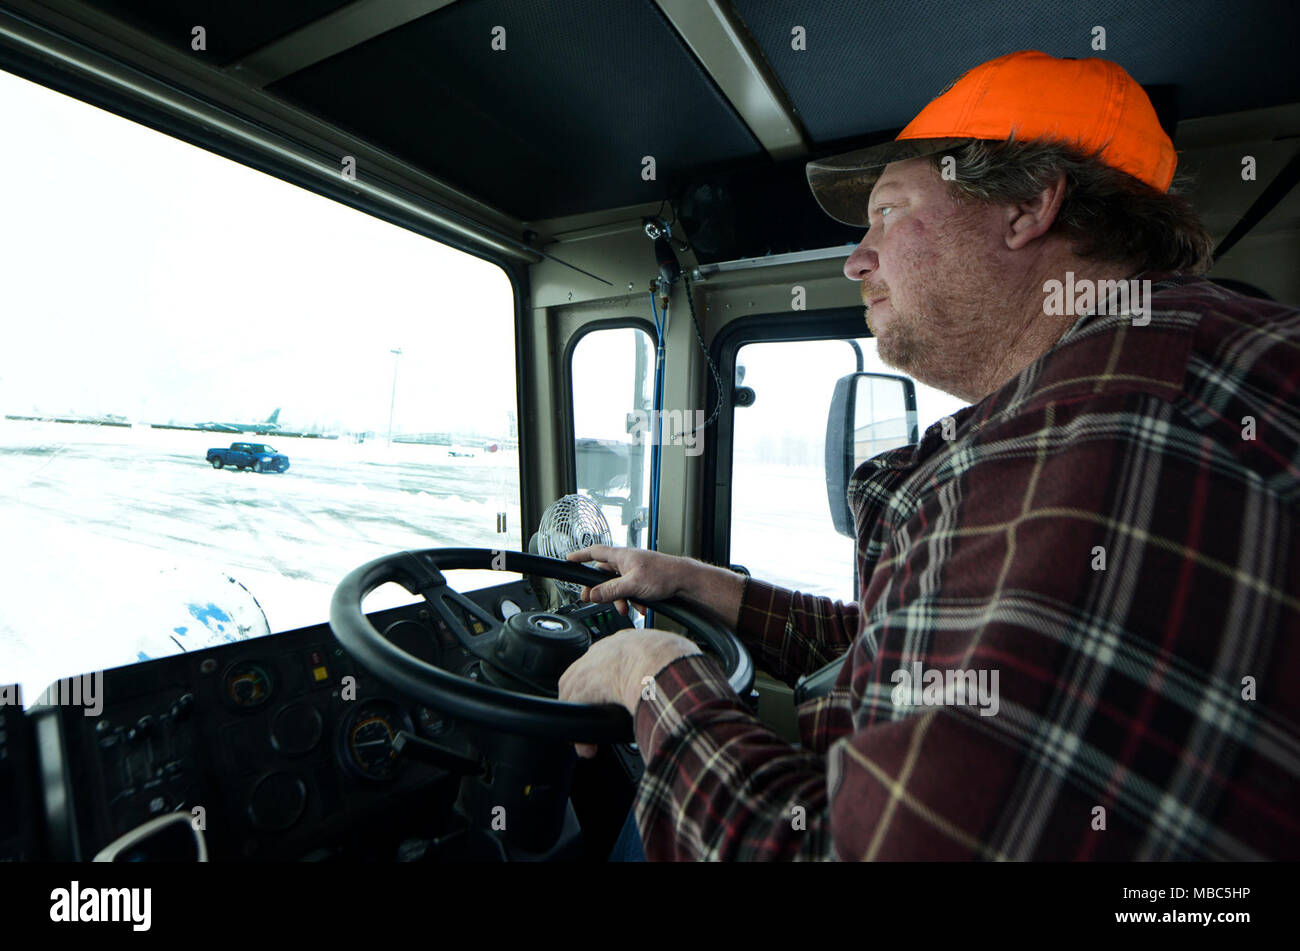 Doug Flint, 92nd Civil Engineer Squadron snow plow operator, clears the flight line using a snow removal truck at Fairchild Air Force Base, Washington, Feb. 14, 2018. Team Fairchild’s Snow Barn is not only responsible for snow and ice control across the flight line, all aircraft parking areas and taxiways, but also all the base streets and parking areas. (U.S. Air Force photo/Senior Airman Janelle Patiño) Stock Photo